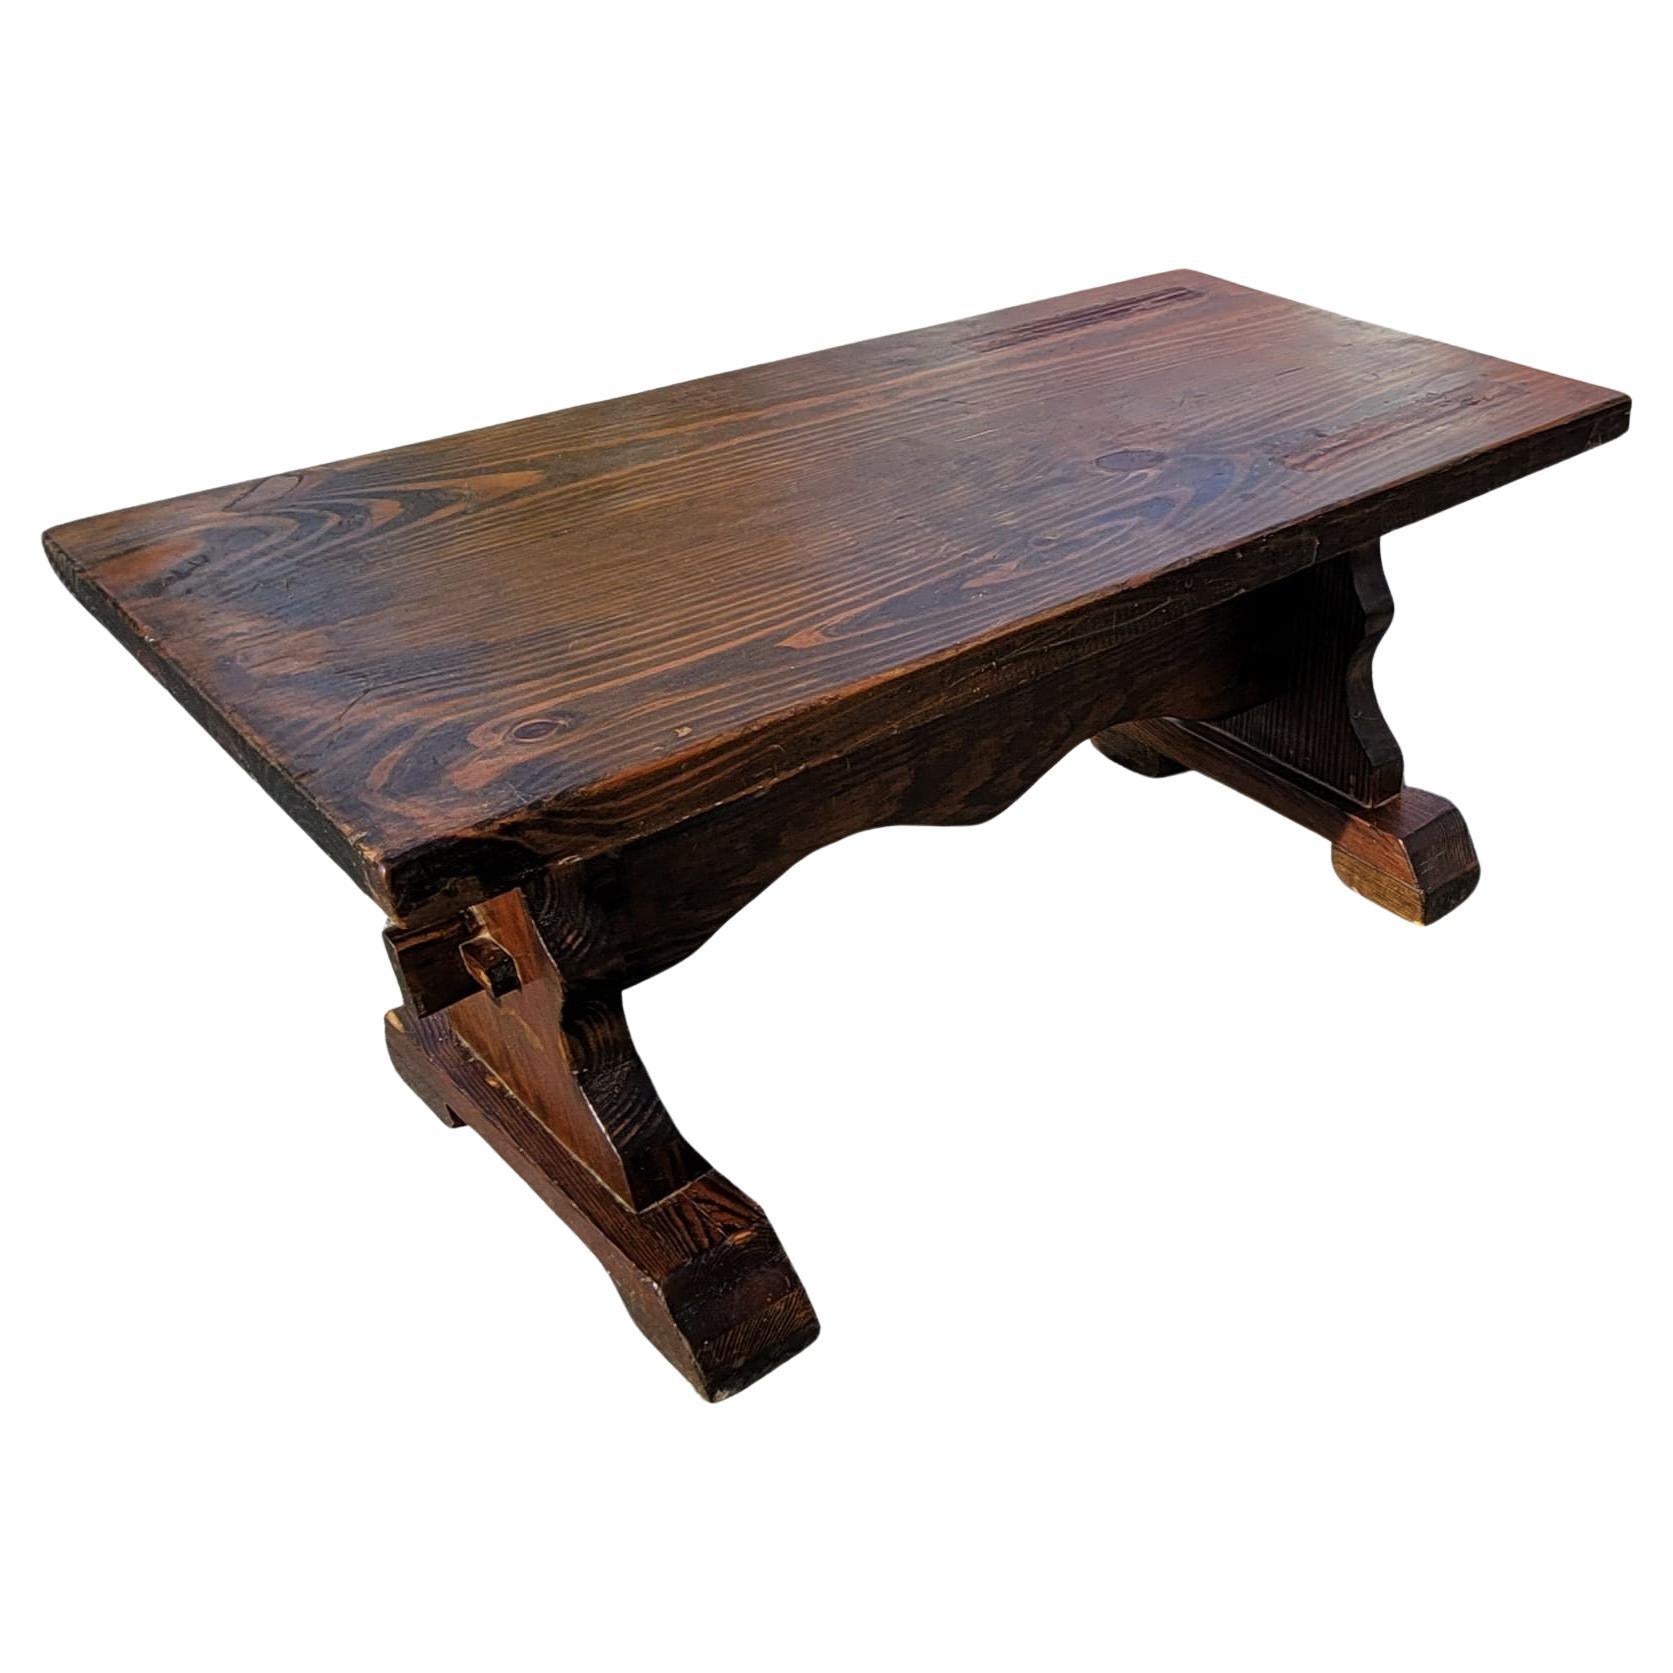 Jacobean style trestle cocktail or coffee Table. Very Sturdy Heavy Solid Oak Construction. Nice Oak Graining To Top Strong Lyre Shaped End Supports Middle Stretcher With End Pegs. A Good Quality Vintage Coffee Table That Will Add Charm To Any Room!.